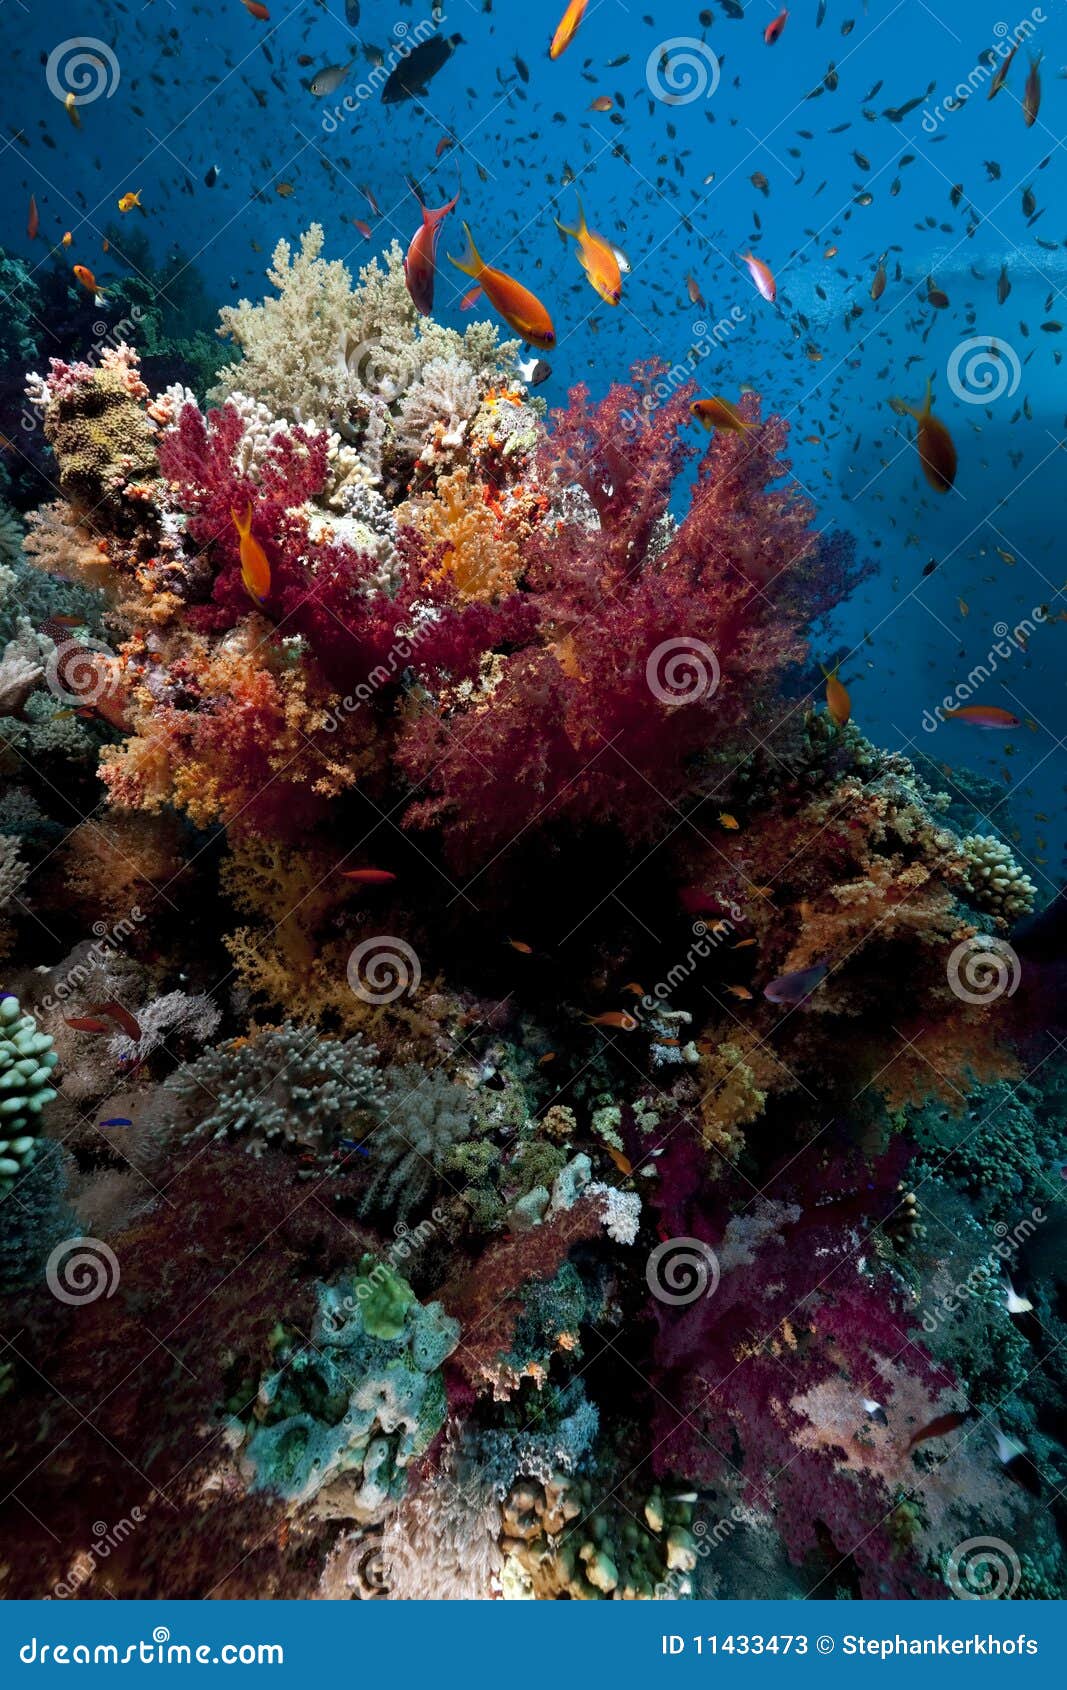 Coral And Fish Stock Photos - Image: 11433473